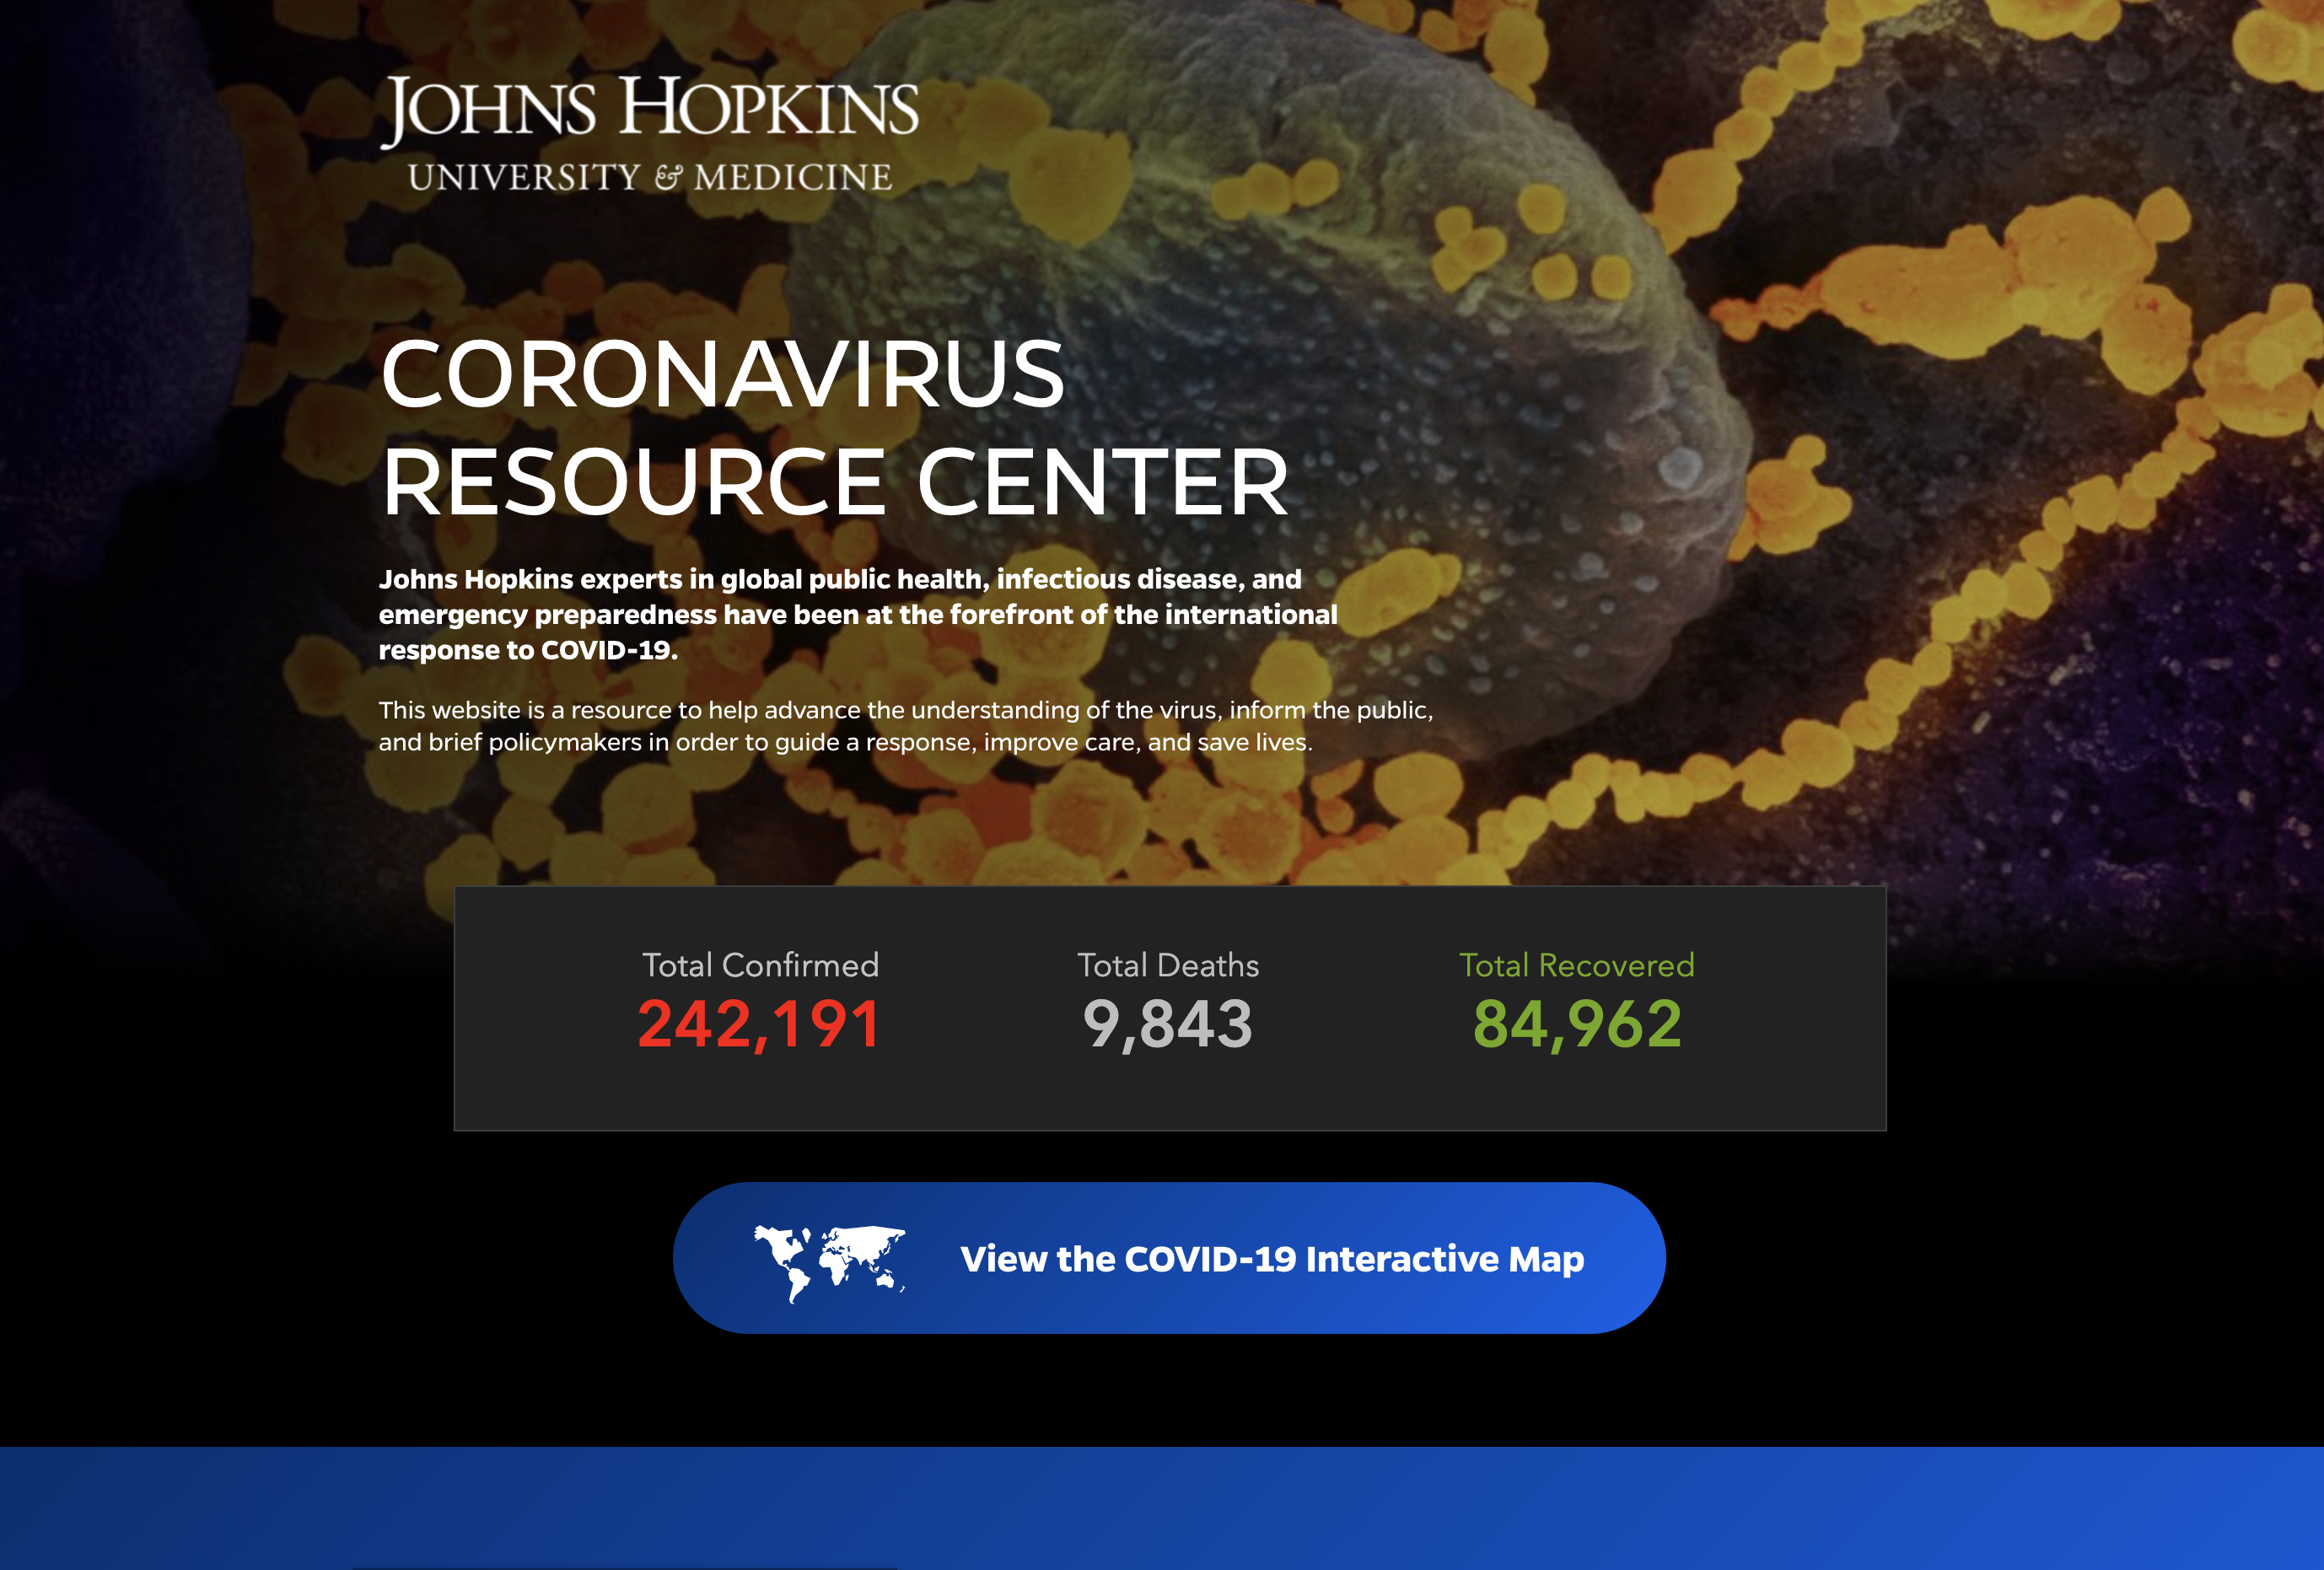 Johns Hopkins on COVID-19 RMTBC Resources